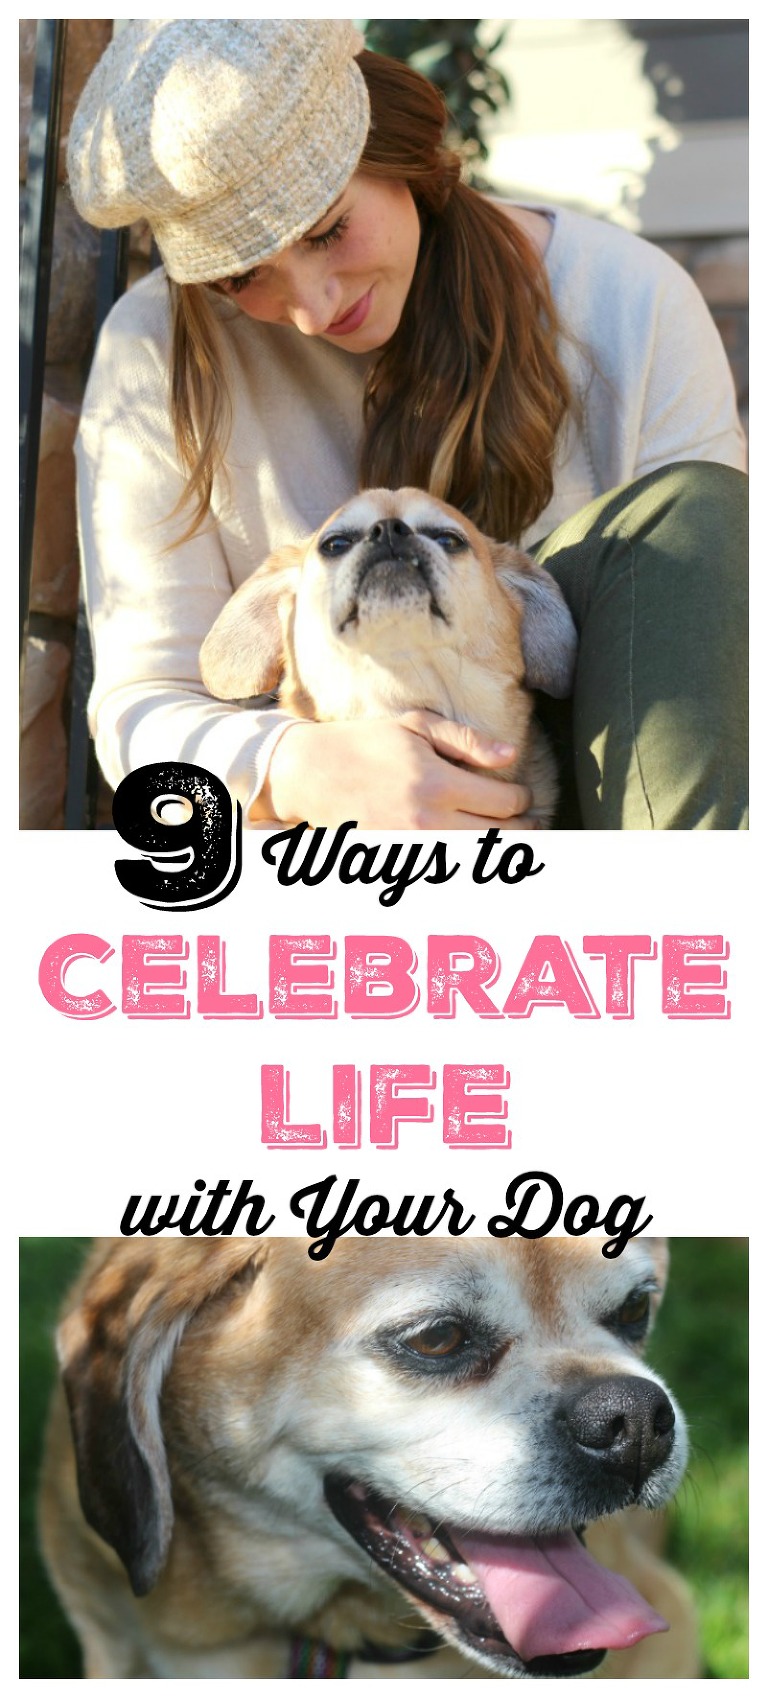 Celebrate Life with Your Dog, best friend, dog ownership, dog tips, owning a dog